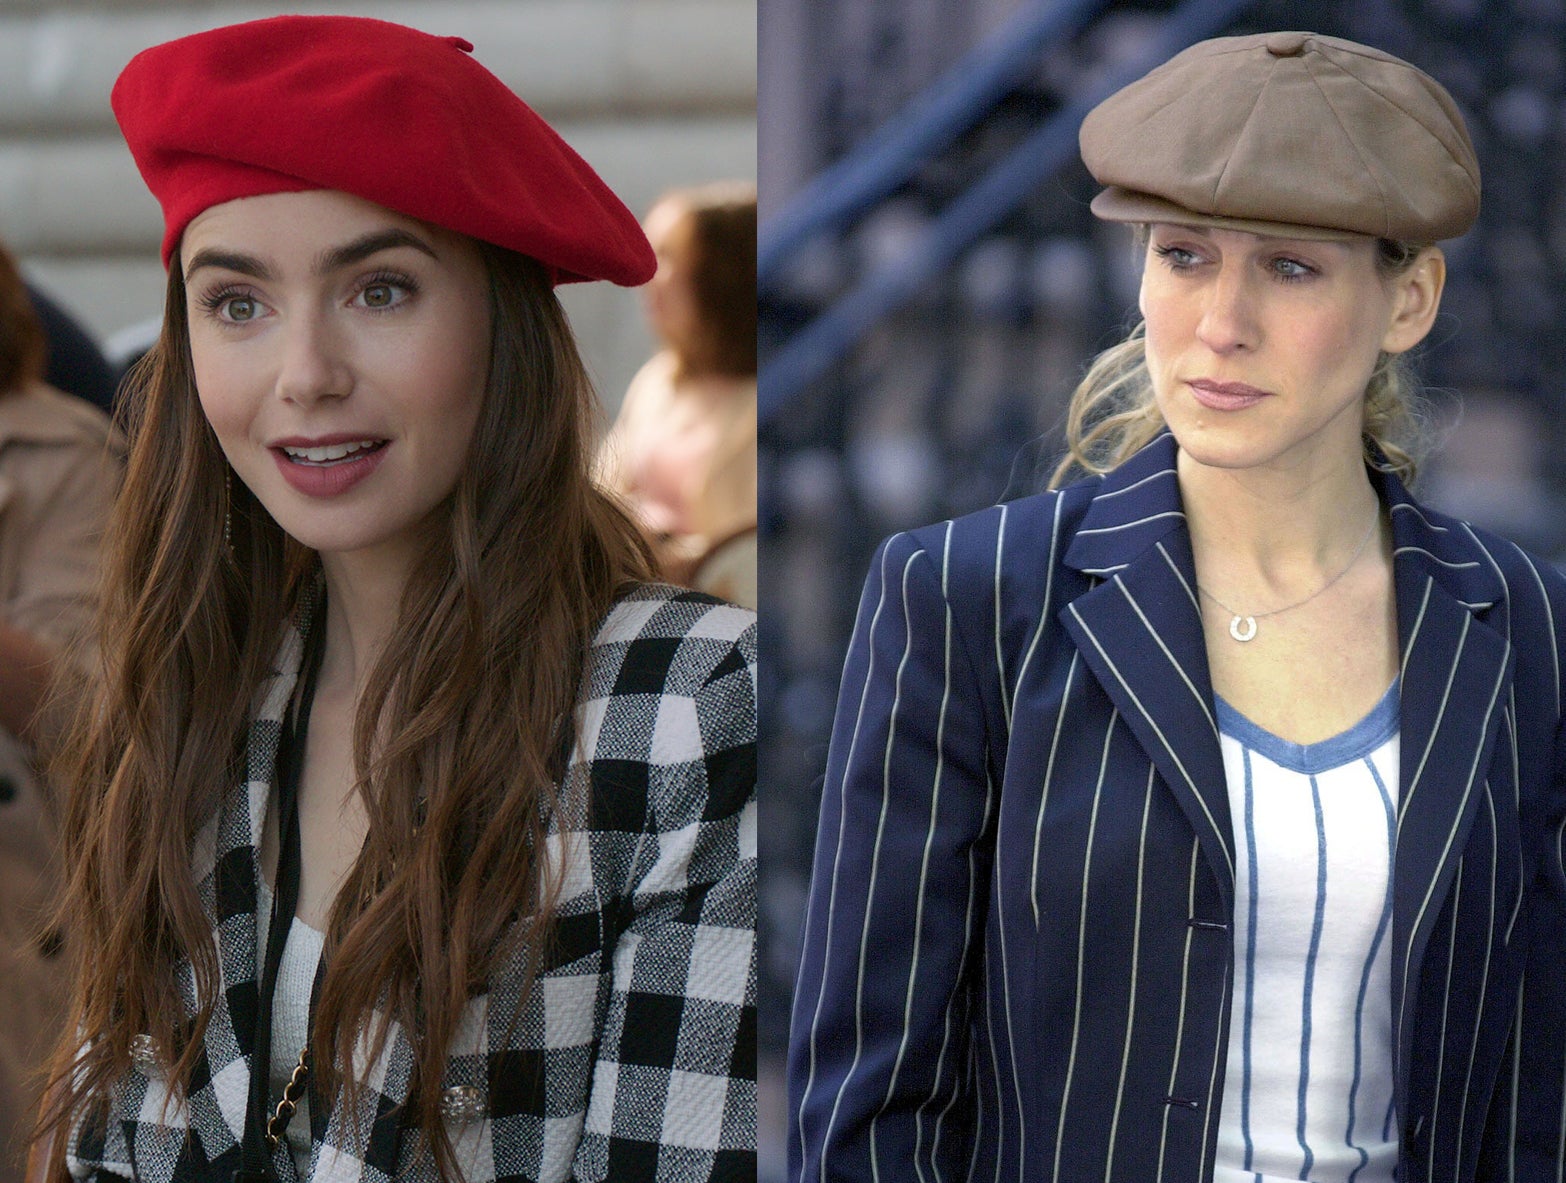 Emily in Paris fashion: Five best style moments from the Netflix